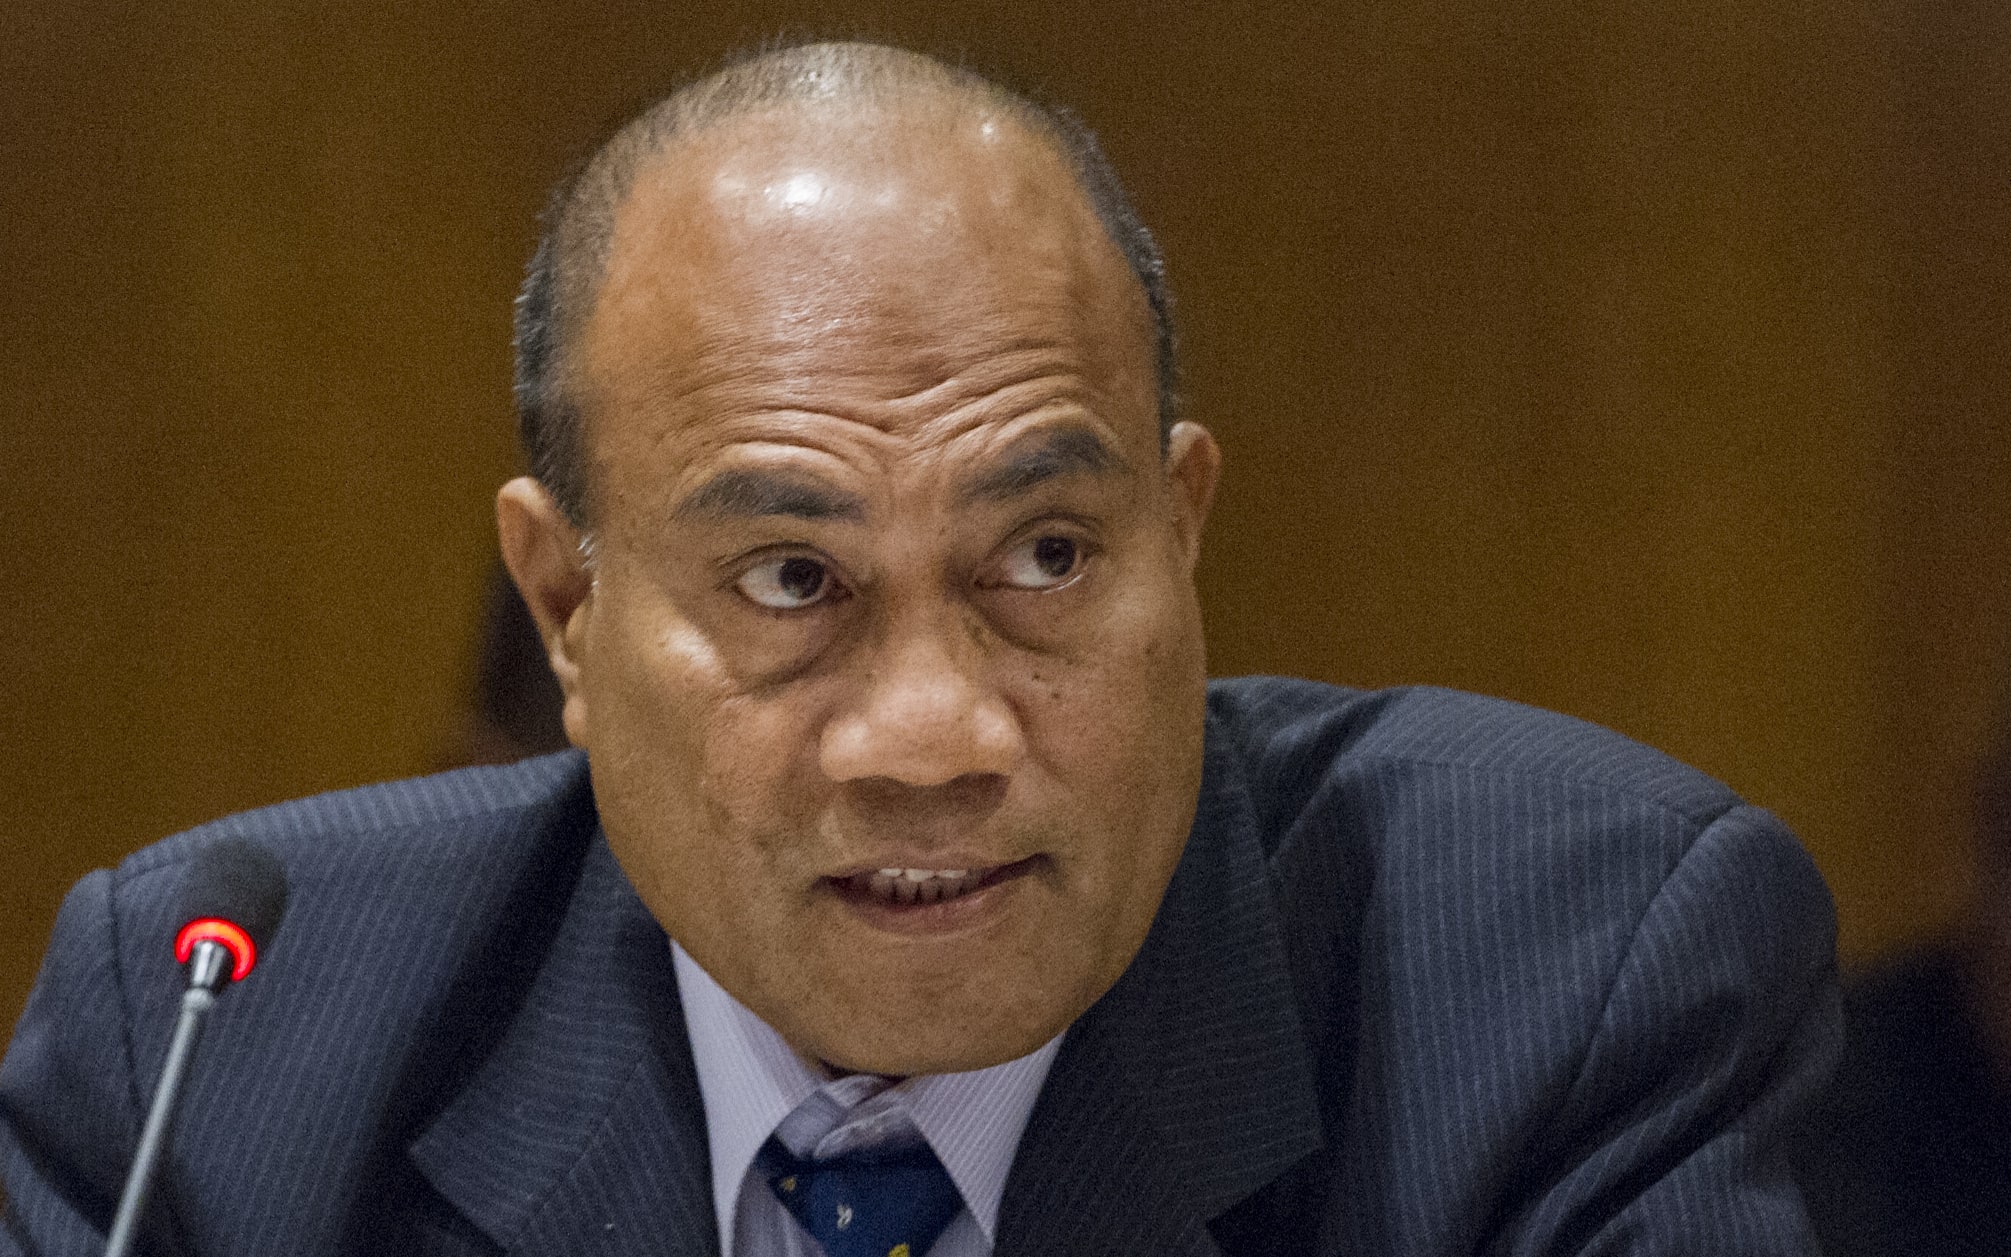 Taneti Maamau, President of Kiribati, speaks at the meeting with Pacific Island Forum Leaders, held on the sidelines of the seventy-first session of the General Assembly.